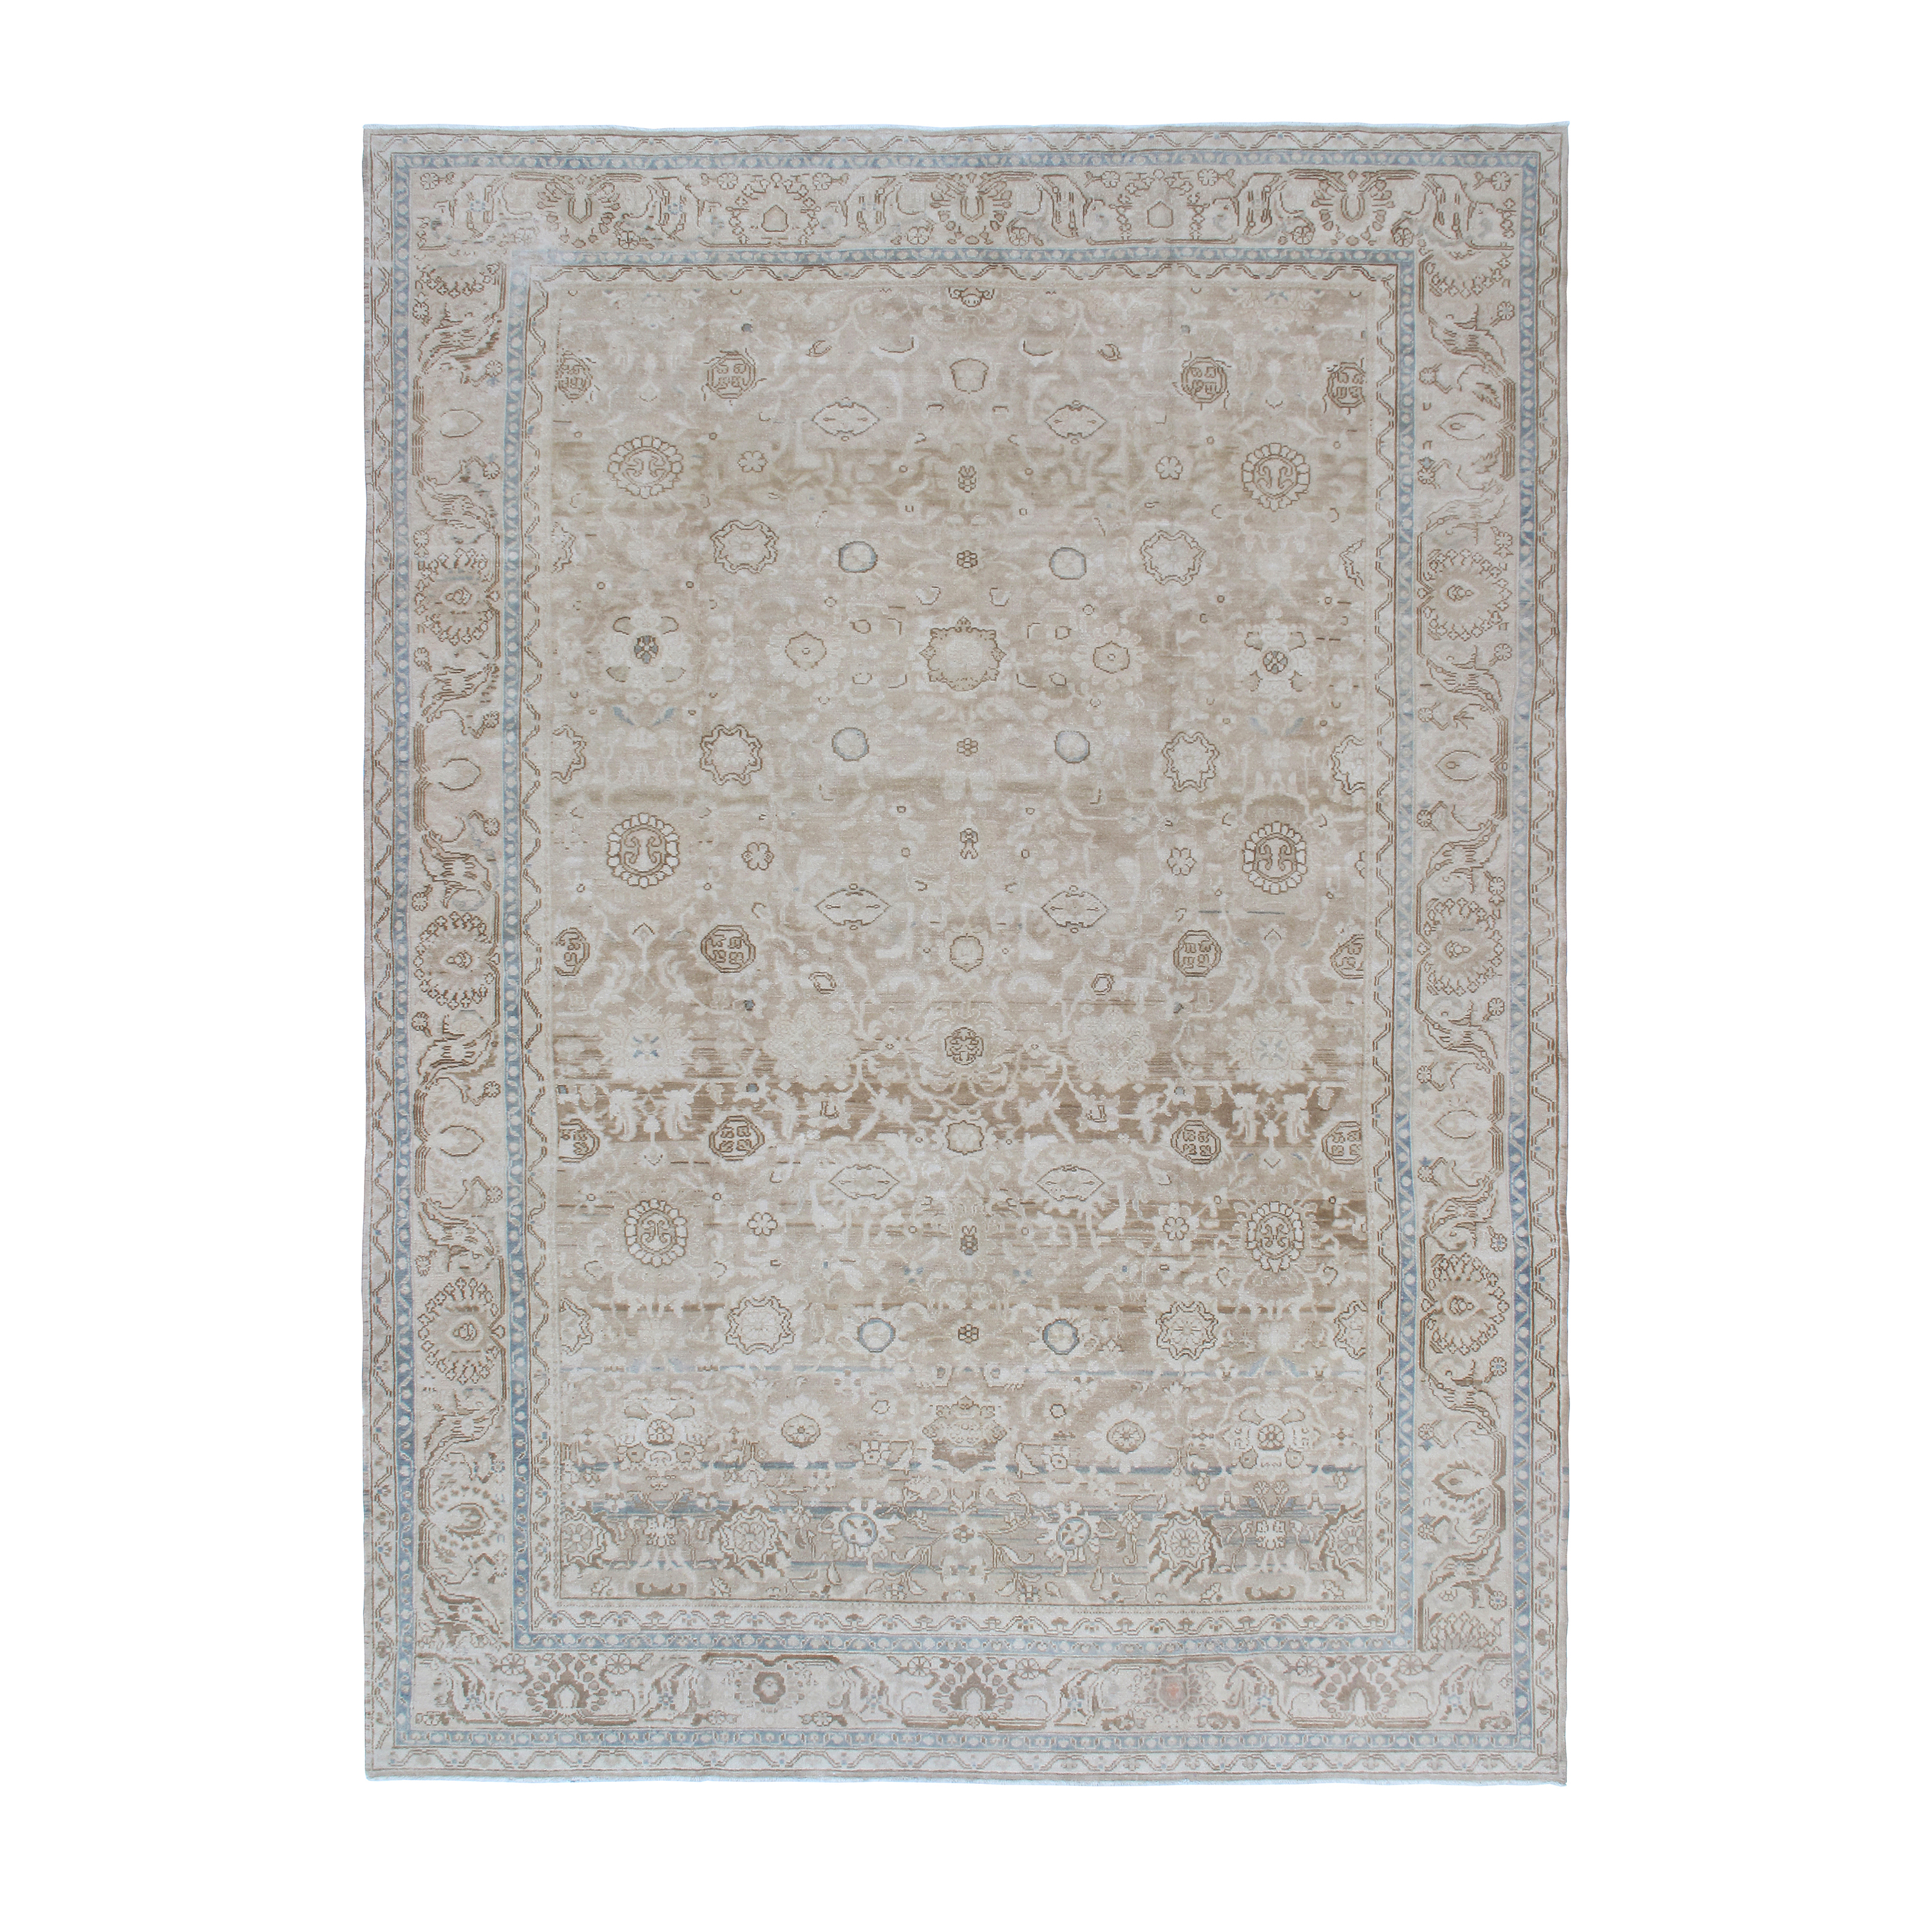 This Malayer rug is  rugs are characterized by their rich motifs and commonly have a repeated pattern or a hexagonal field bound by a border. And this rug is is hand-knotted and made of 100% wool.